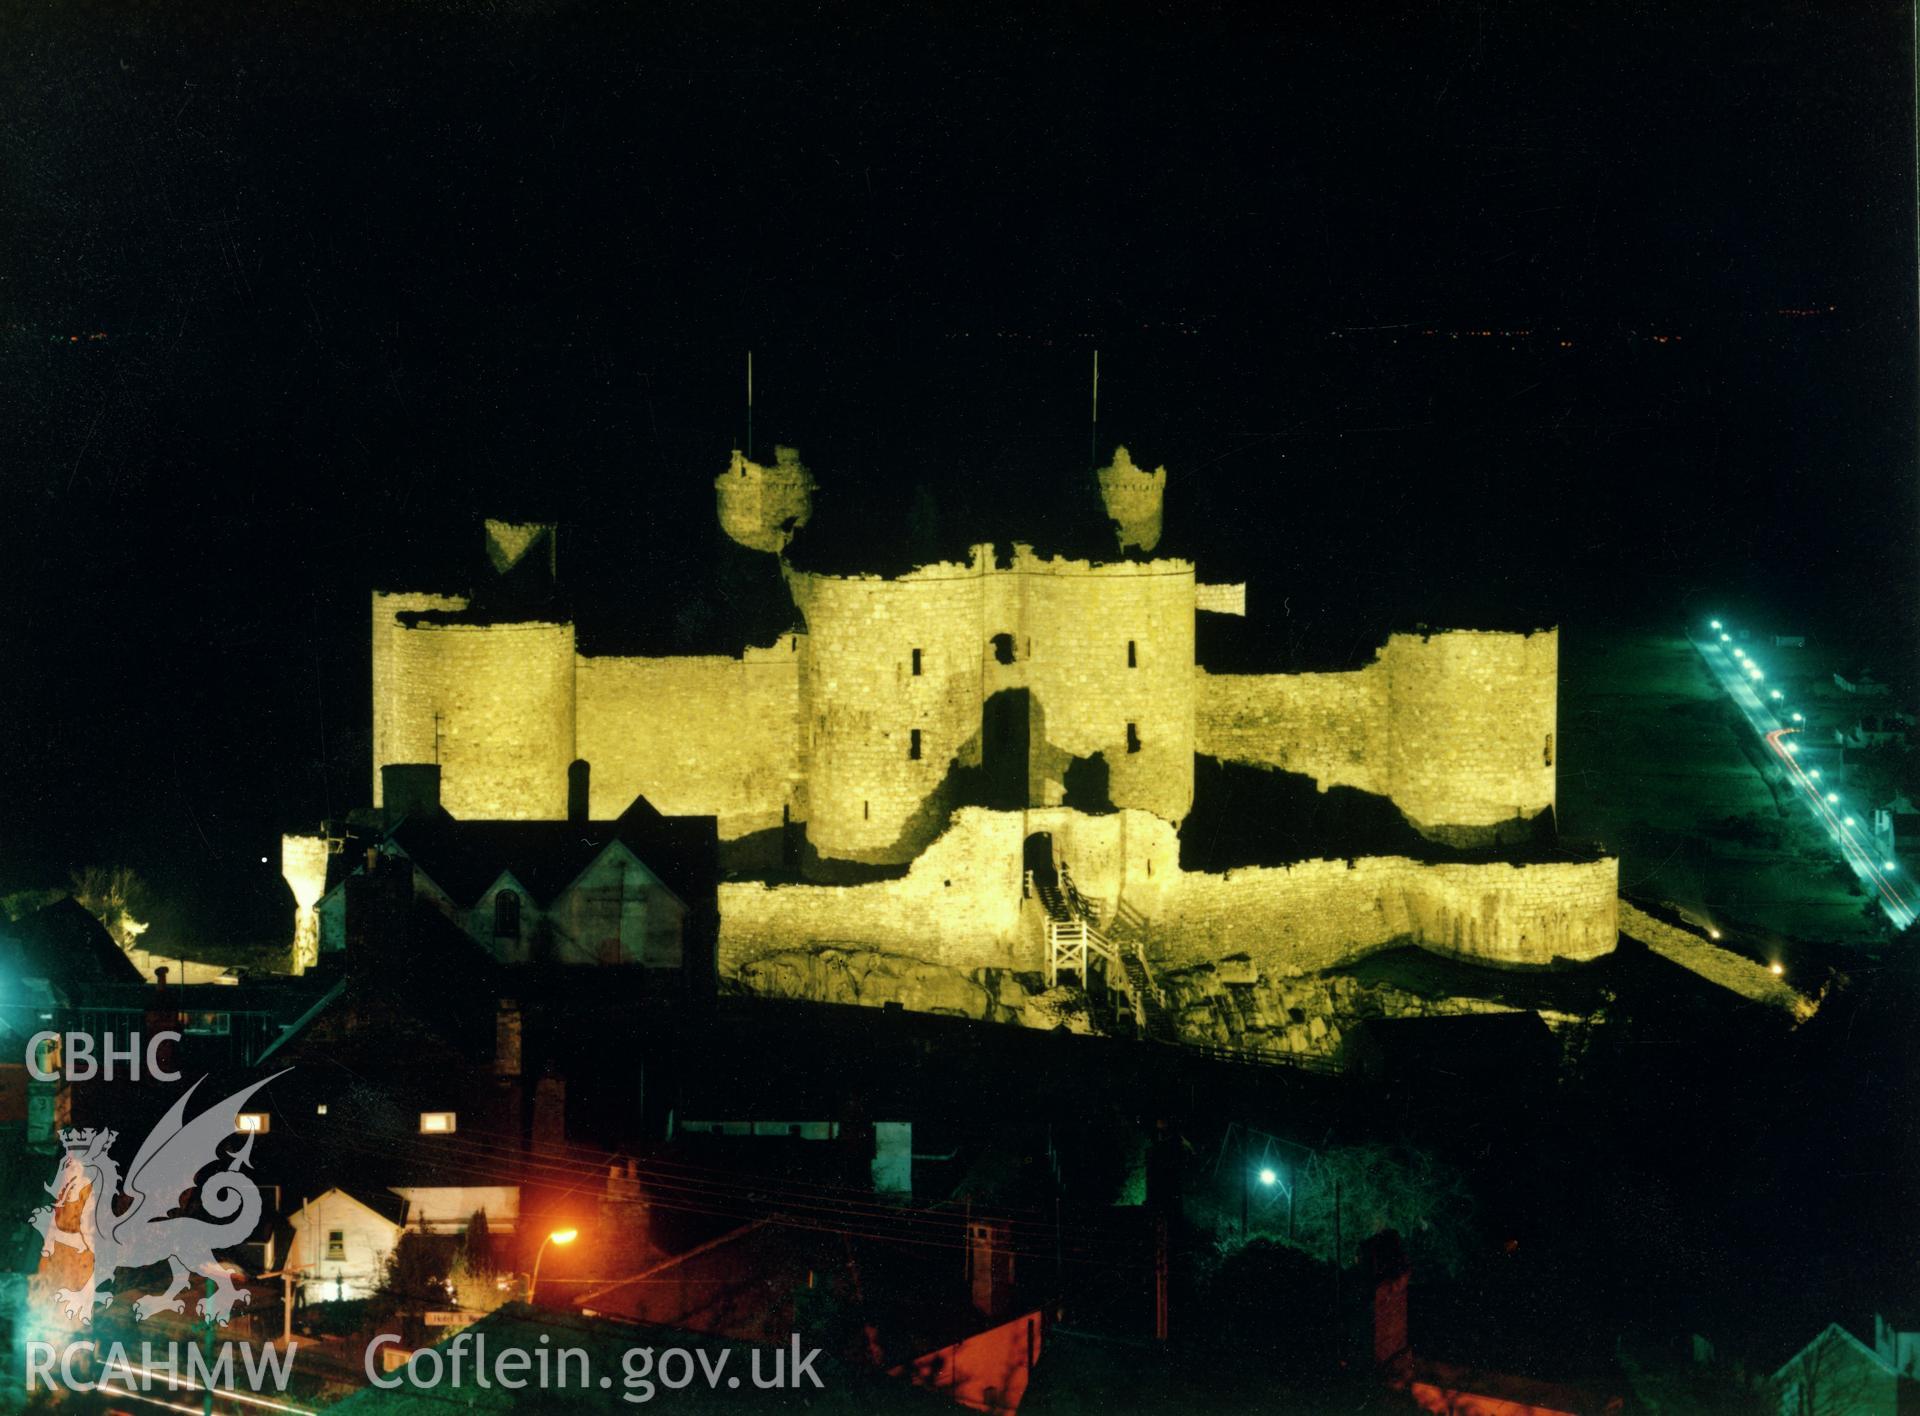 1 of a set of 5 colour prints showing view of Harlech castle at night, collated by the former Central Office of Information.